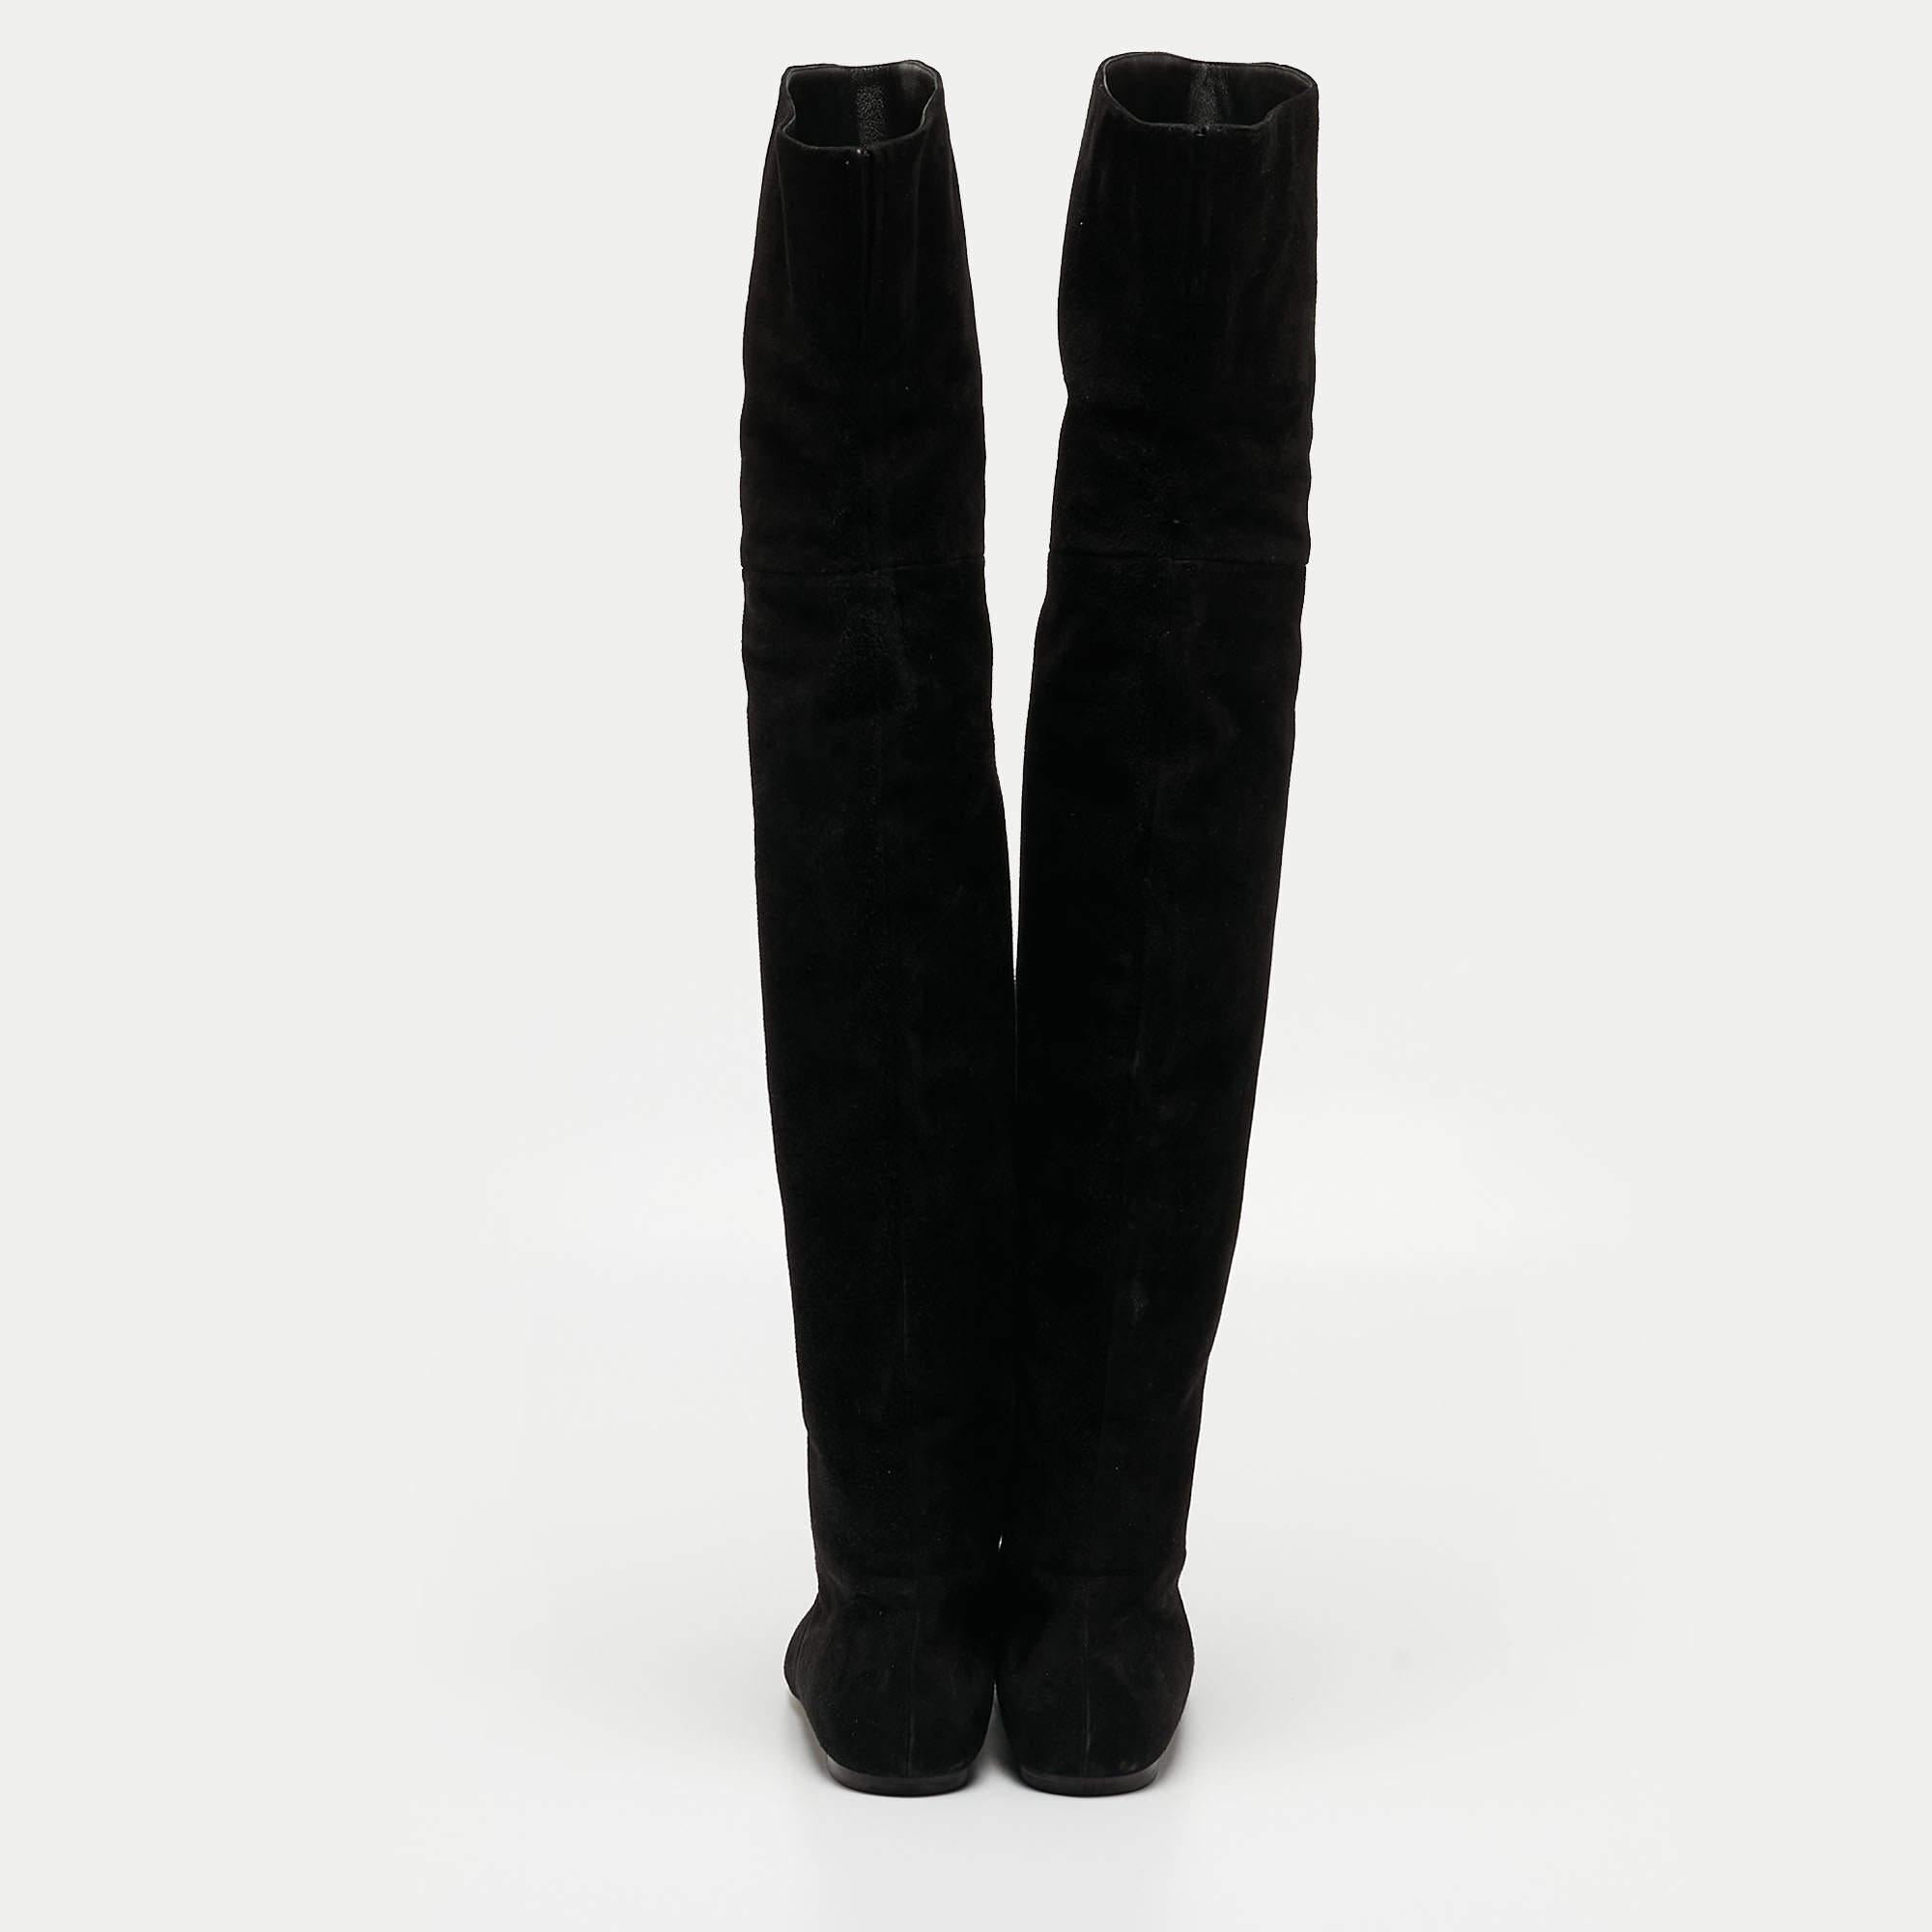 Dolce & Gabbana Black Suede Over The Knee Boots Size 37.5 For Sale 6